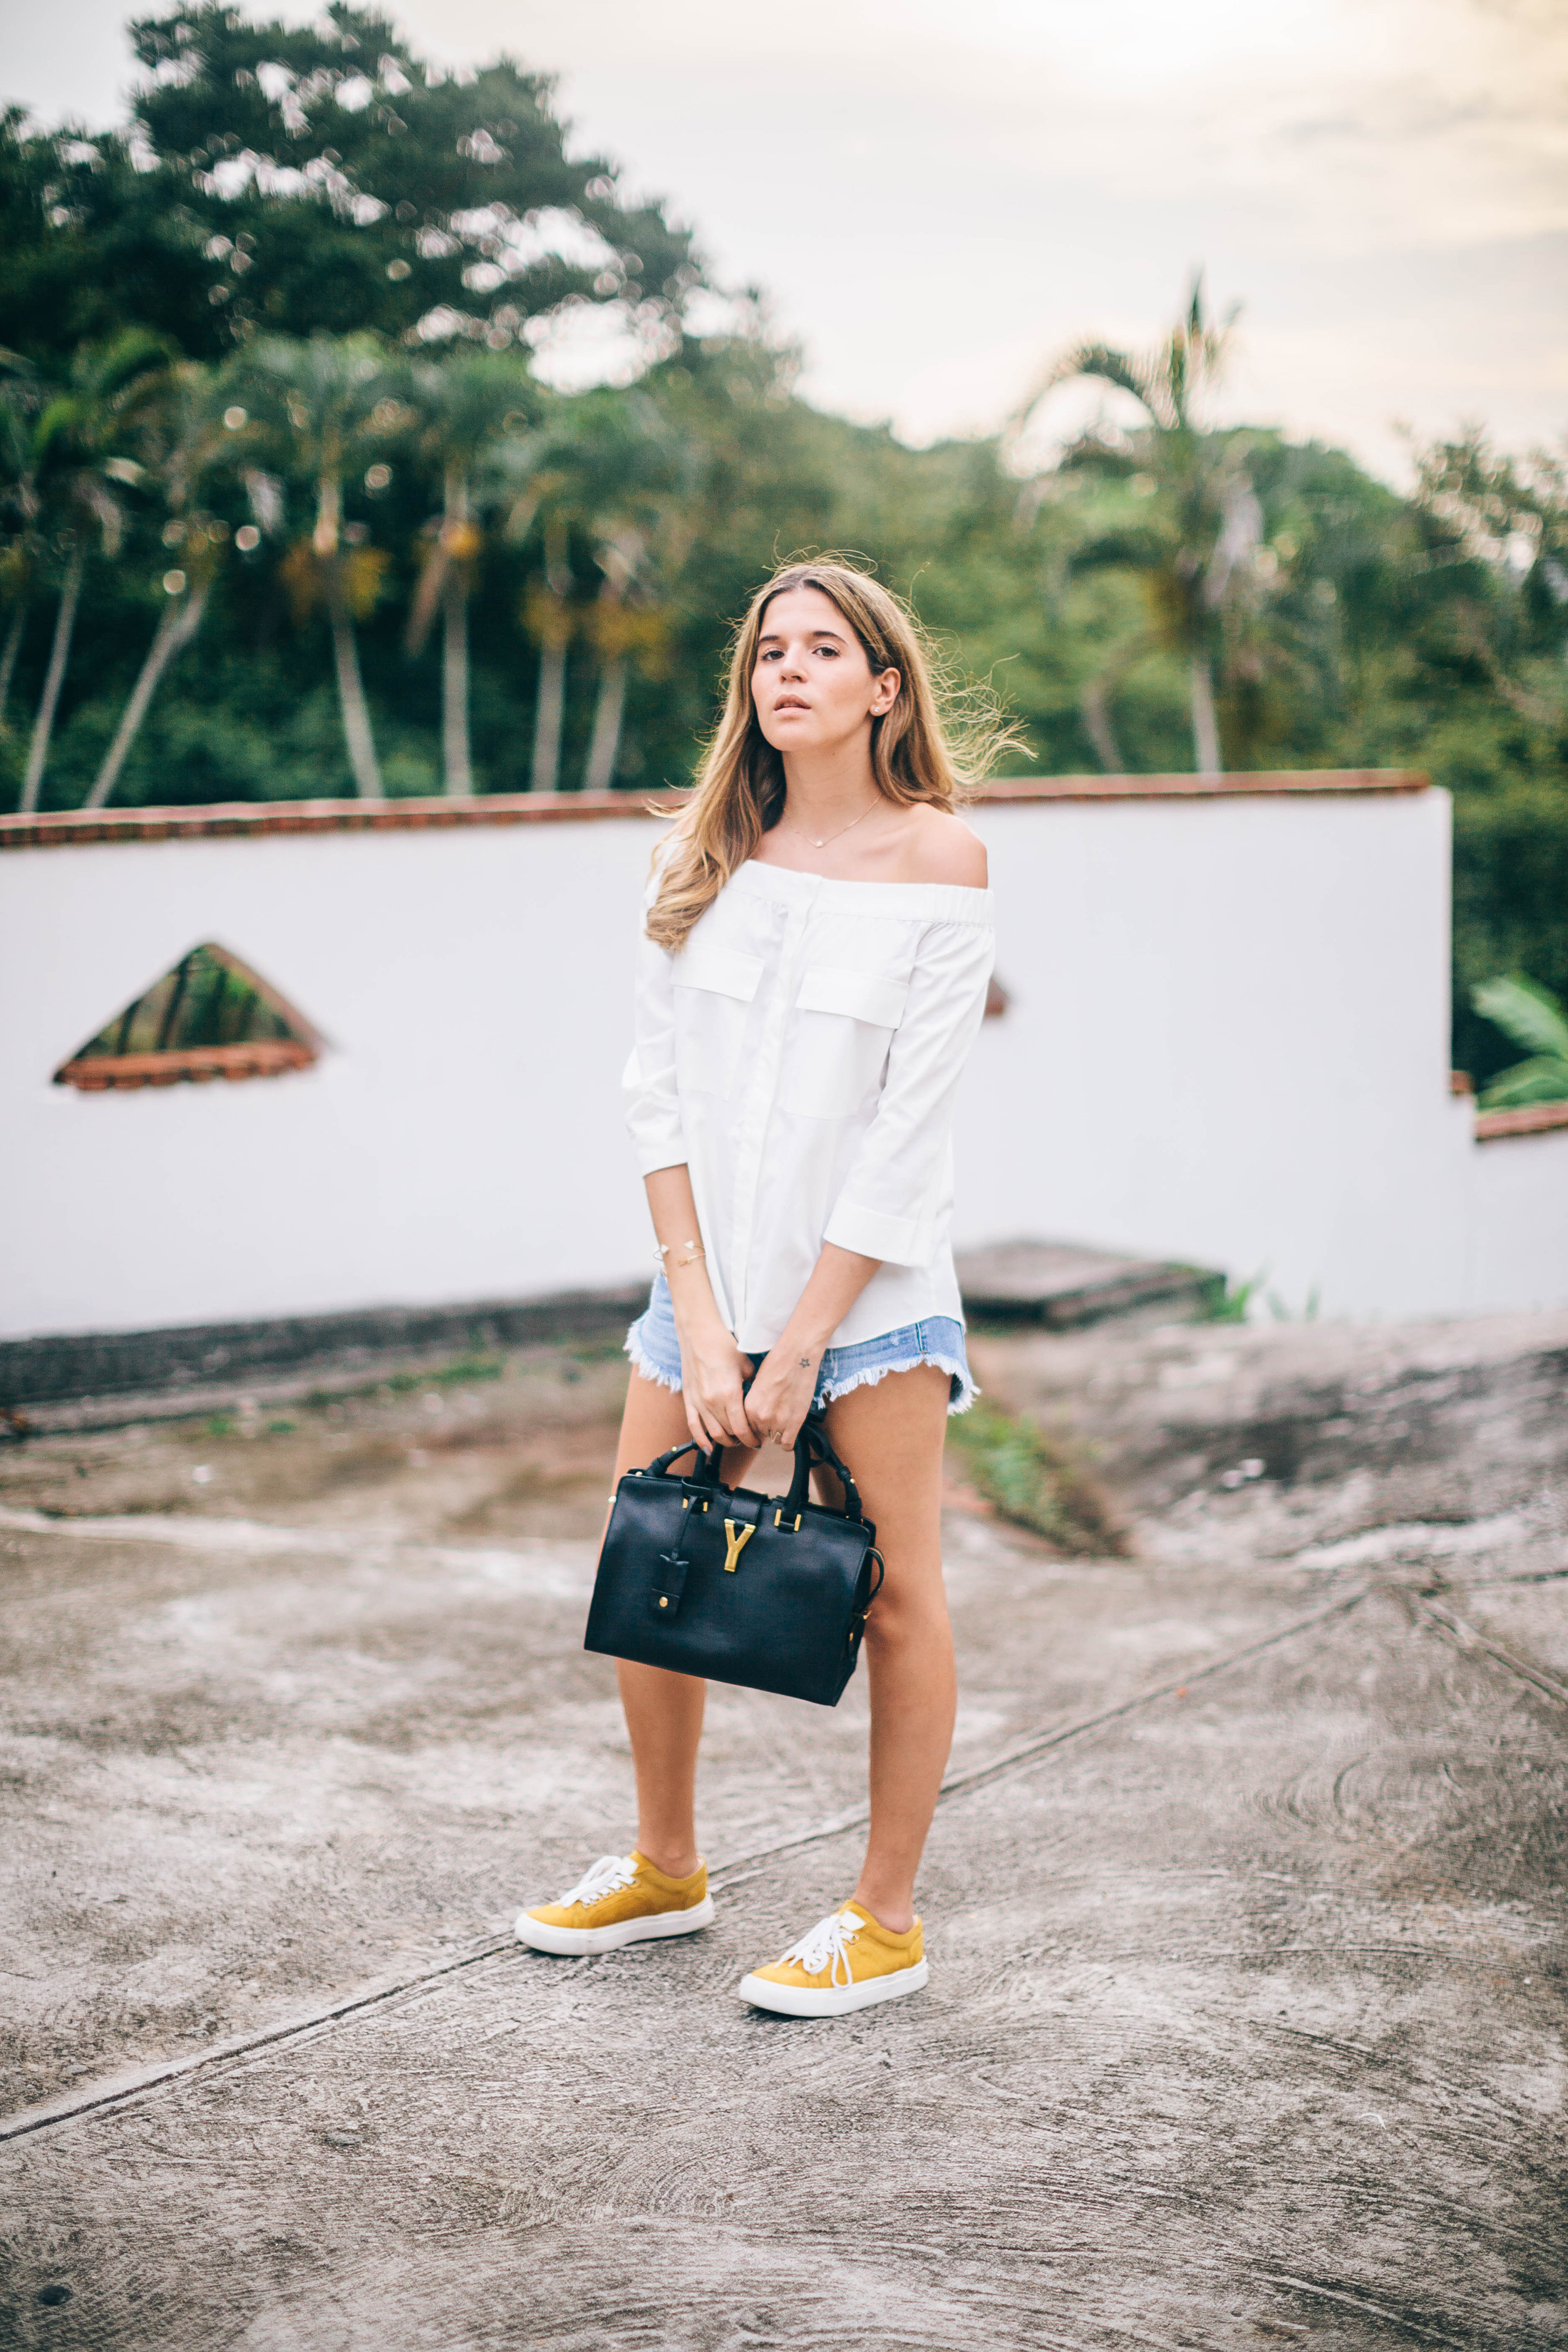 Blogger Maristella wearing an Off the Shoulder white top from H&M, Denim Cut off shorts and sneakers outfit